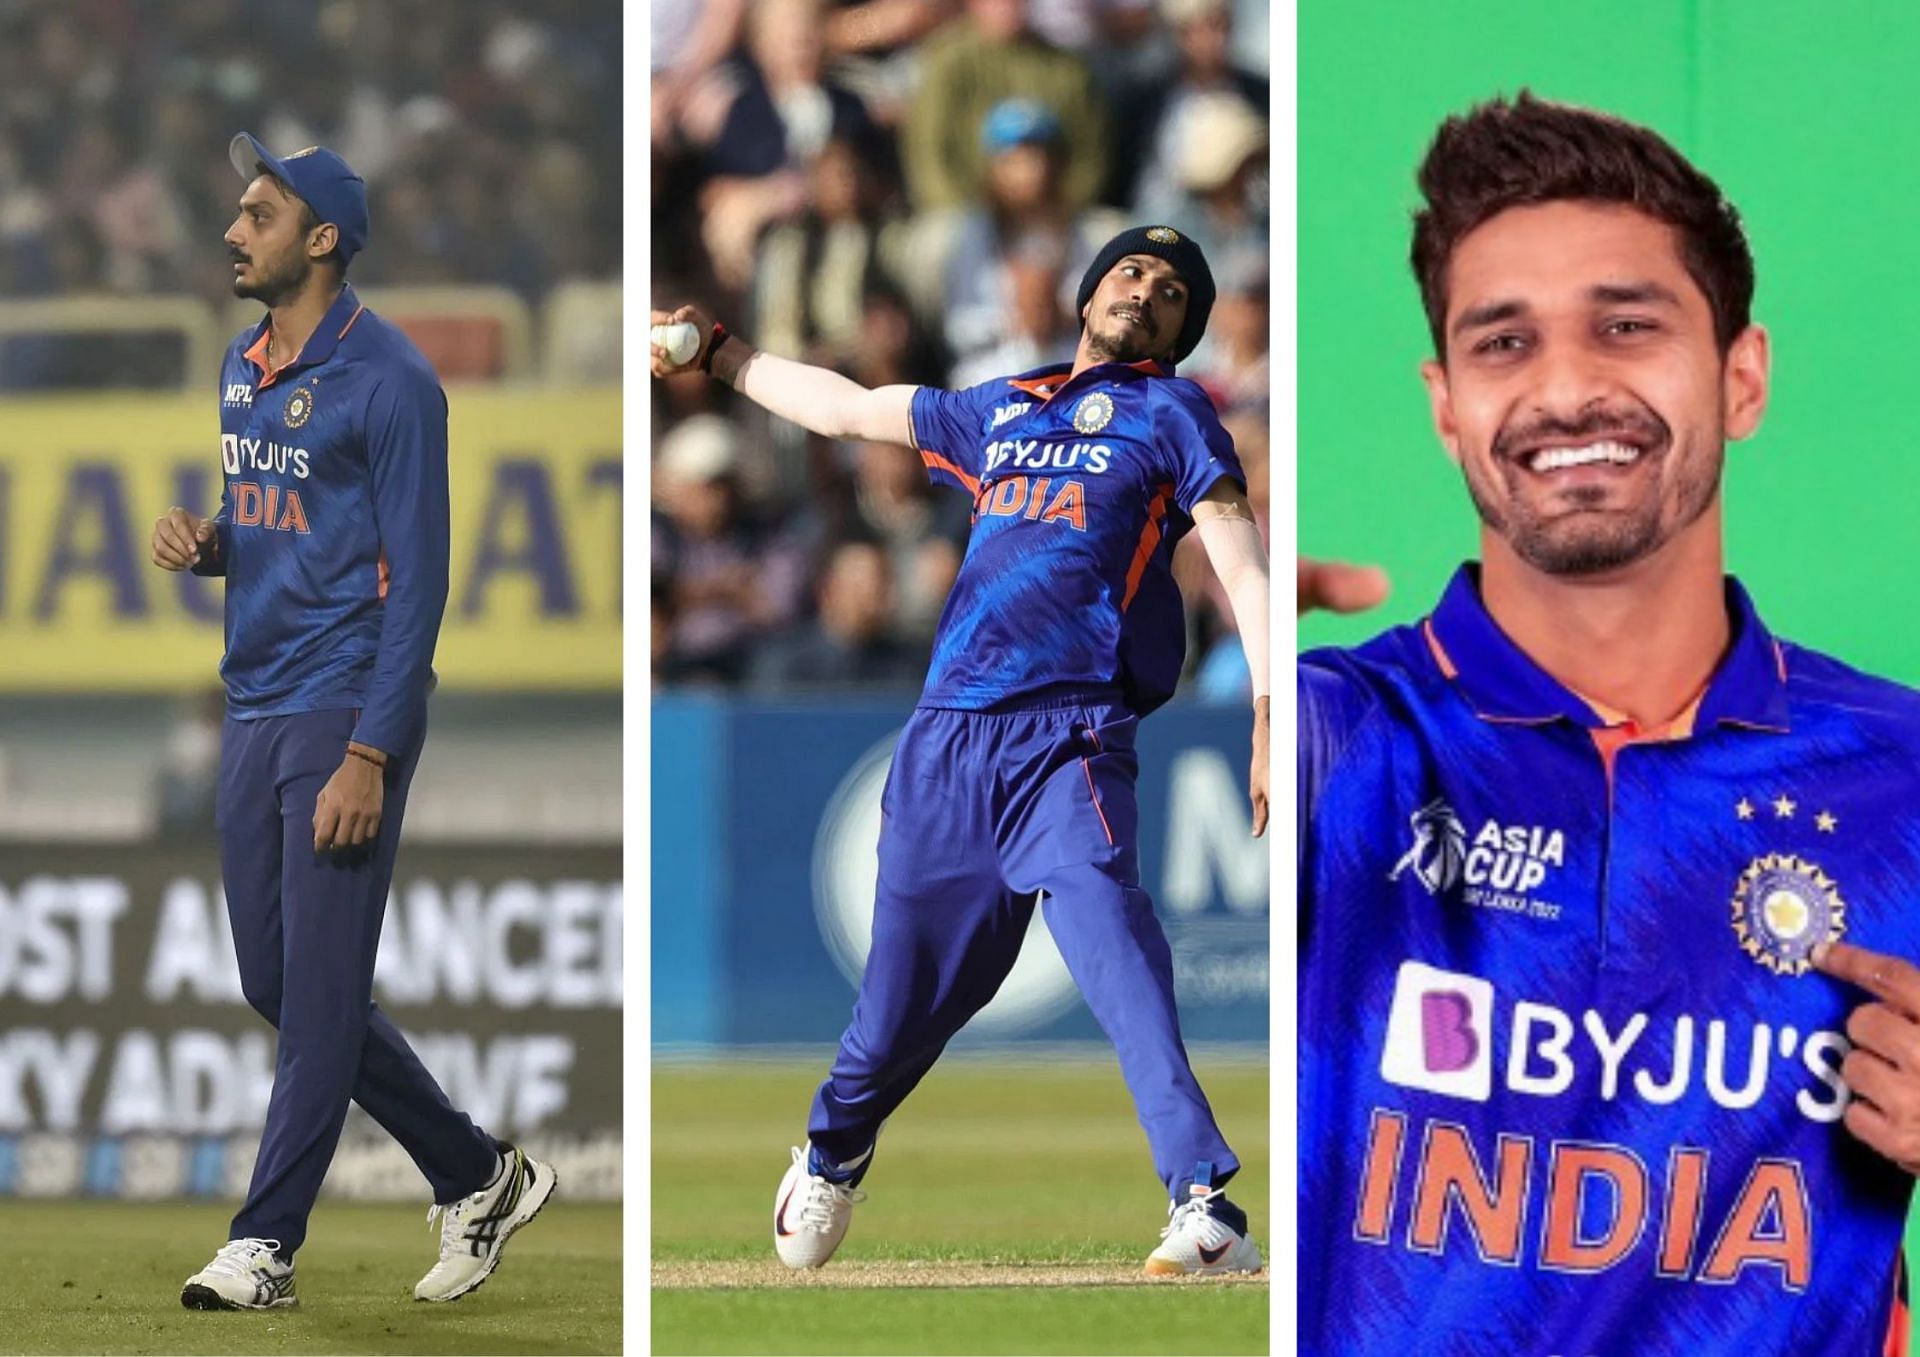 India's squad for T20 World Cup: 3 players who might be surprise heroes